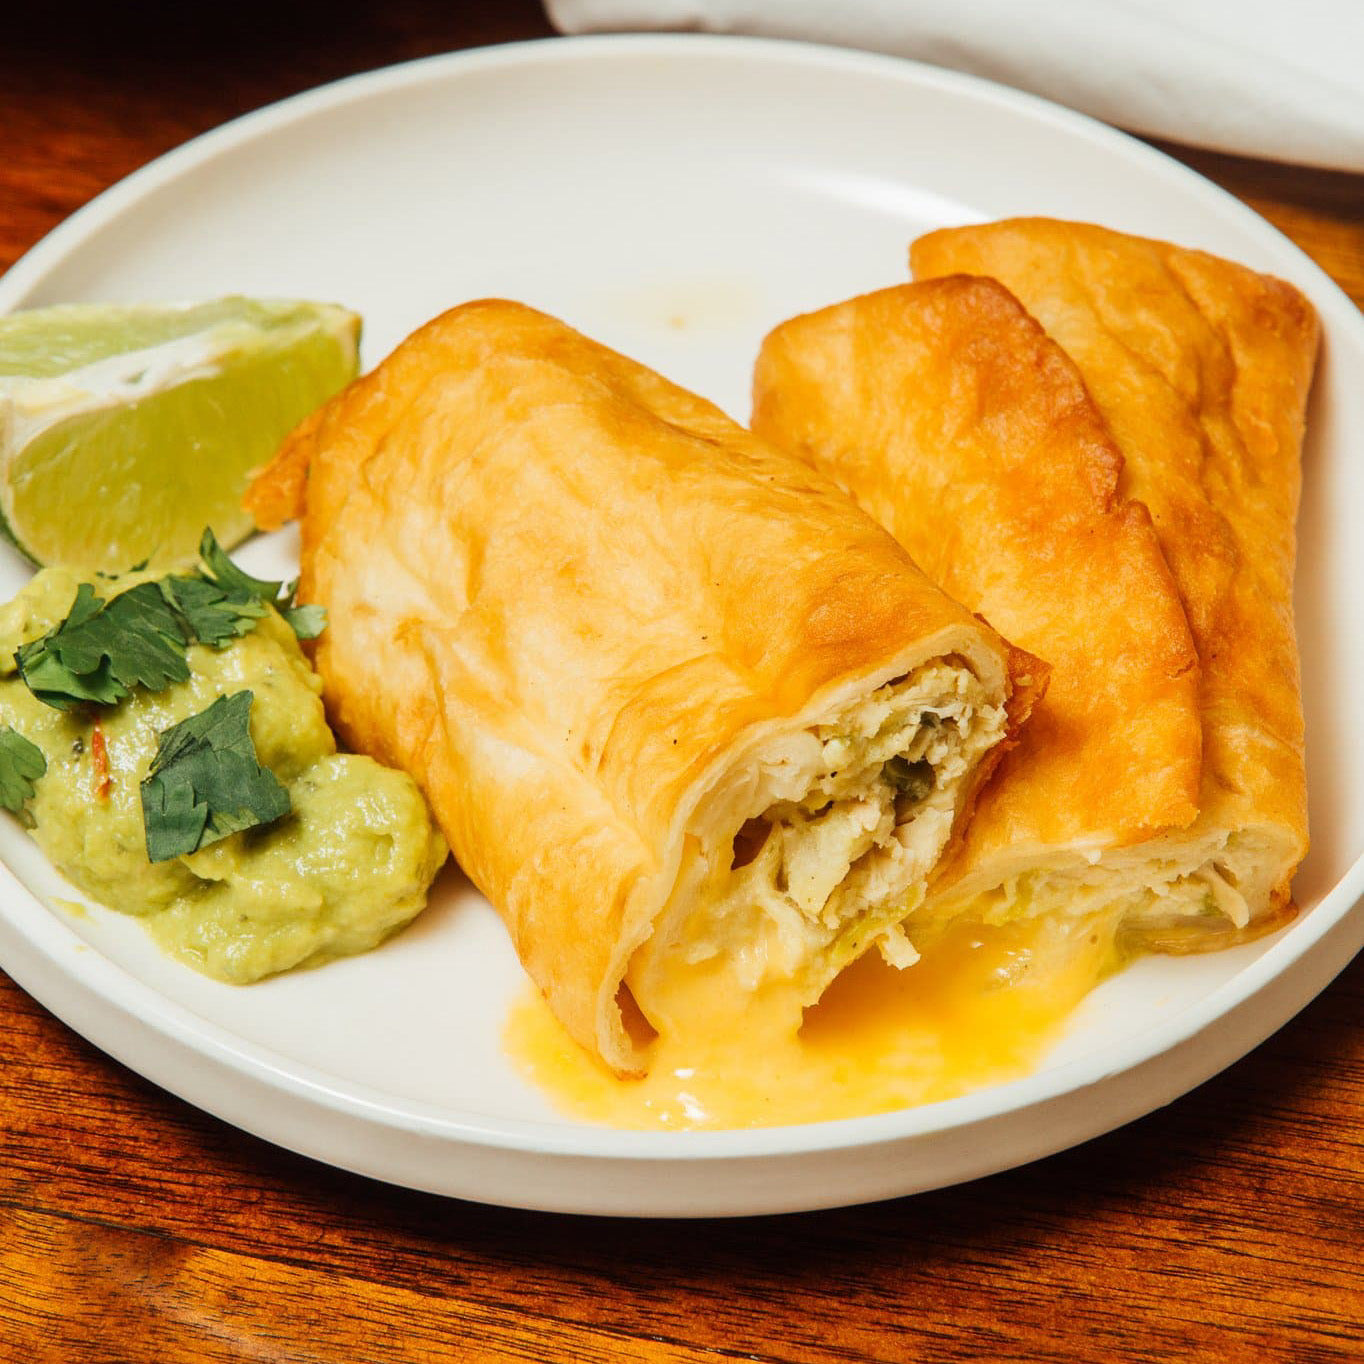 Beef and Green Chili Pepper Chimichangas – My Slice of Mexico